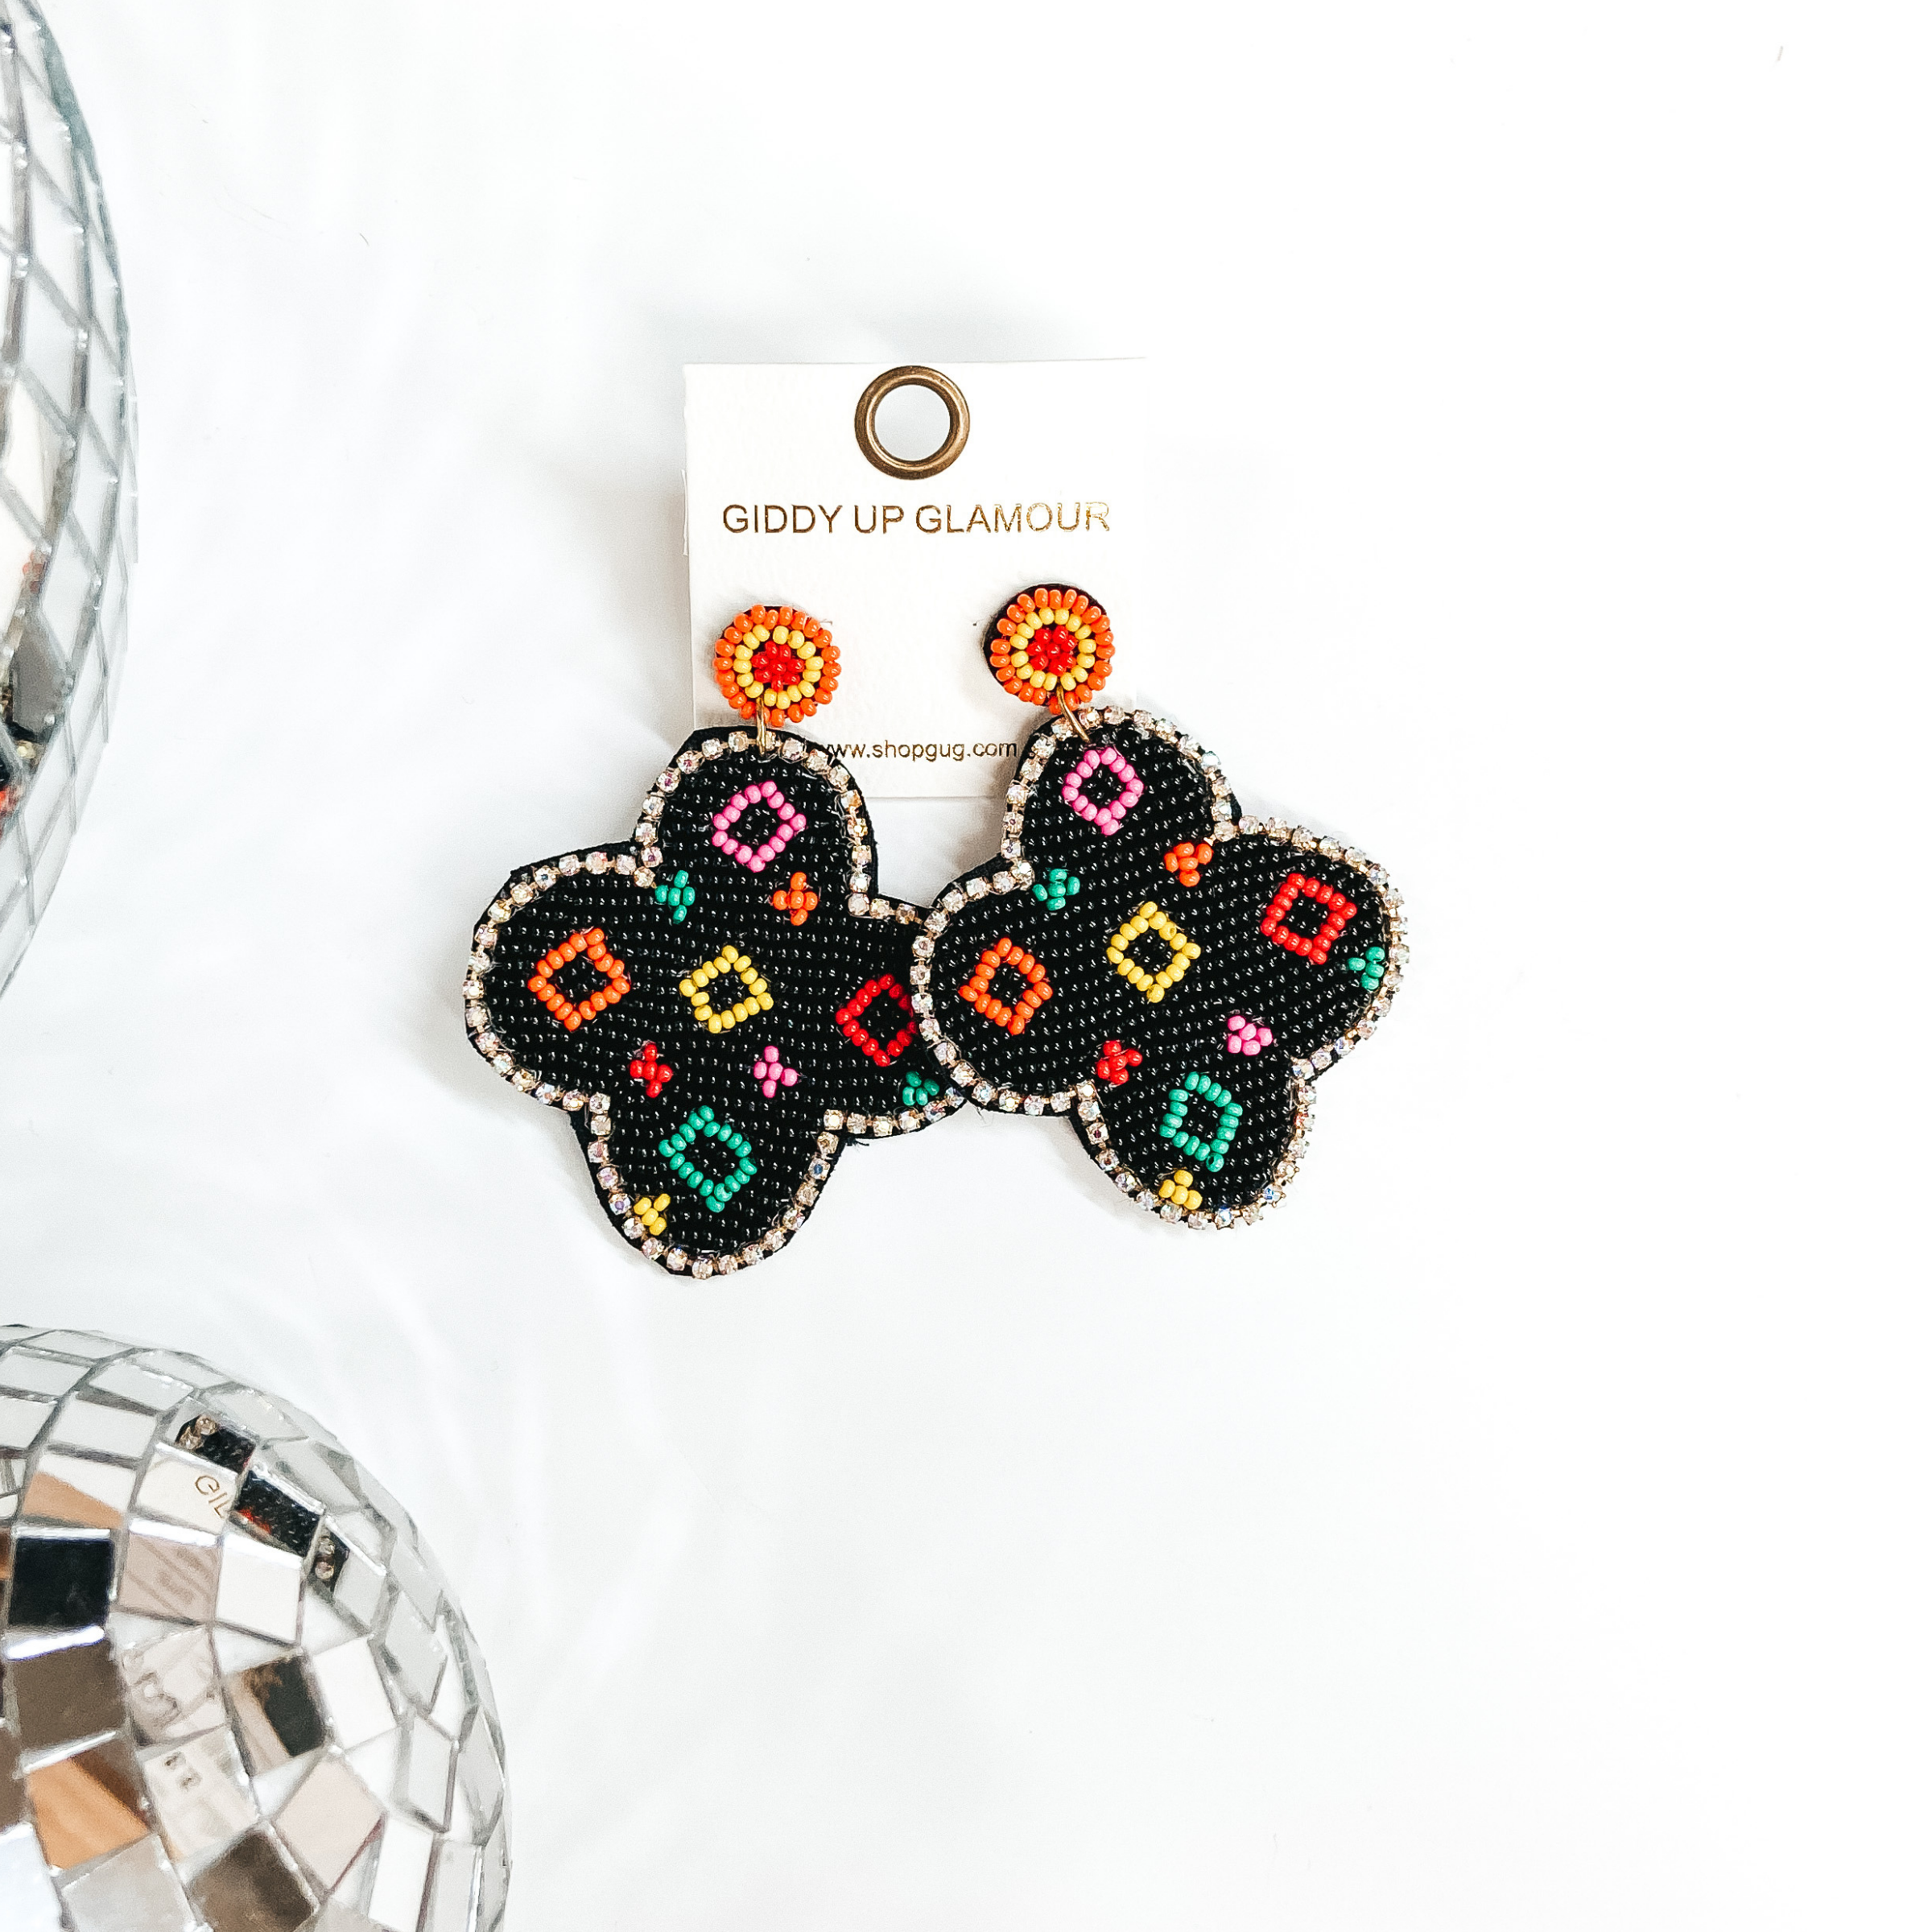 Designer Lifestyle Seedbead Quatrefoil Earrings in Black - Giddy Up Glamour Boutique